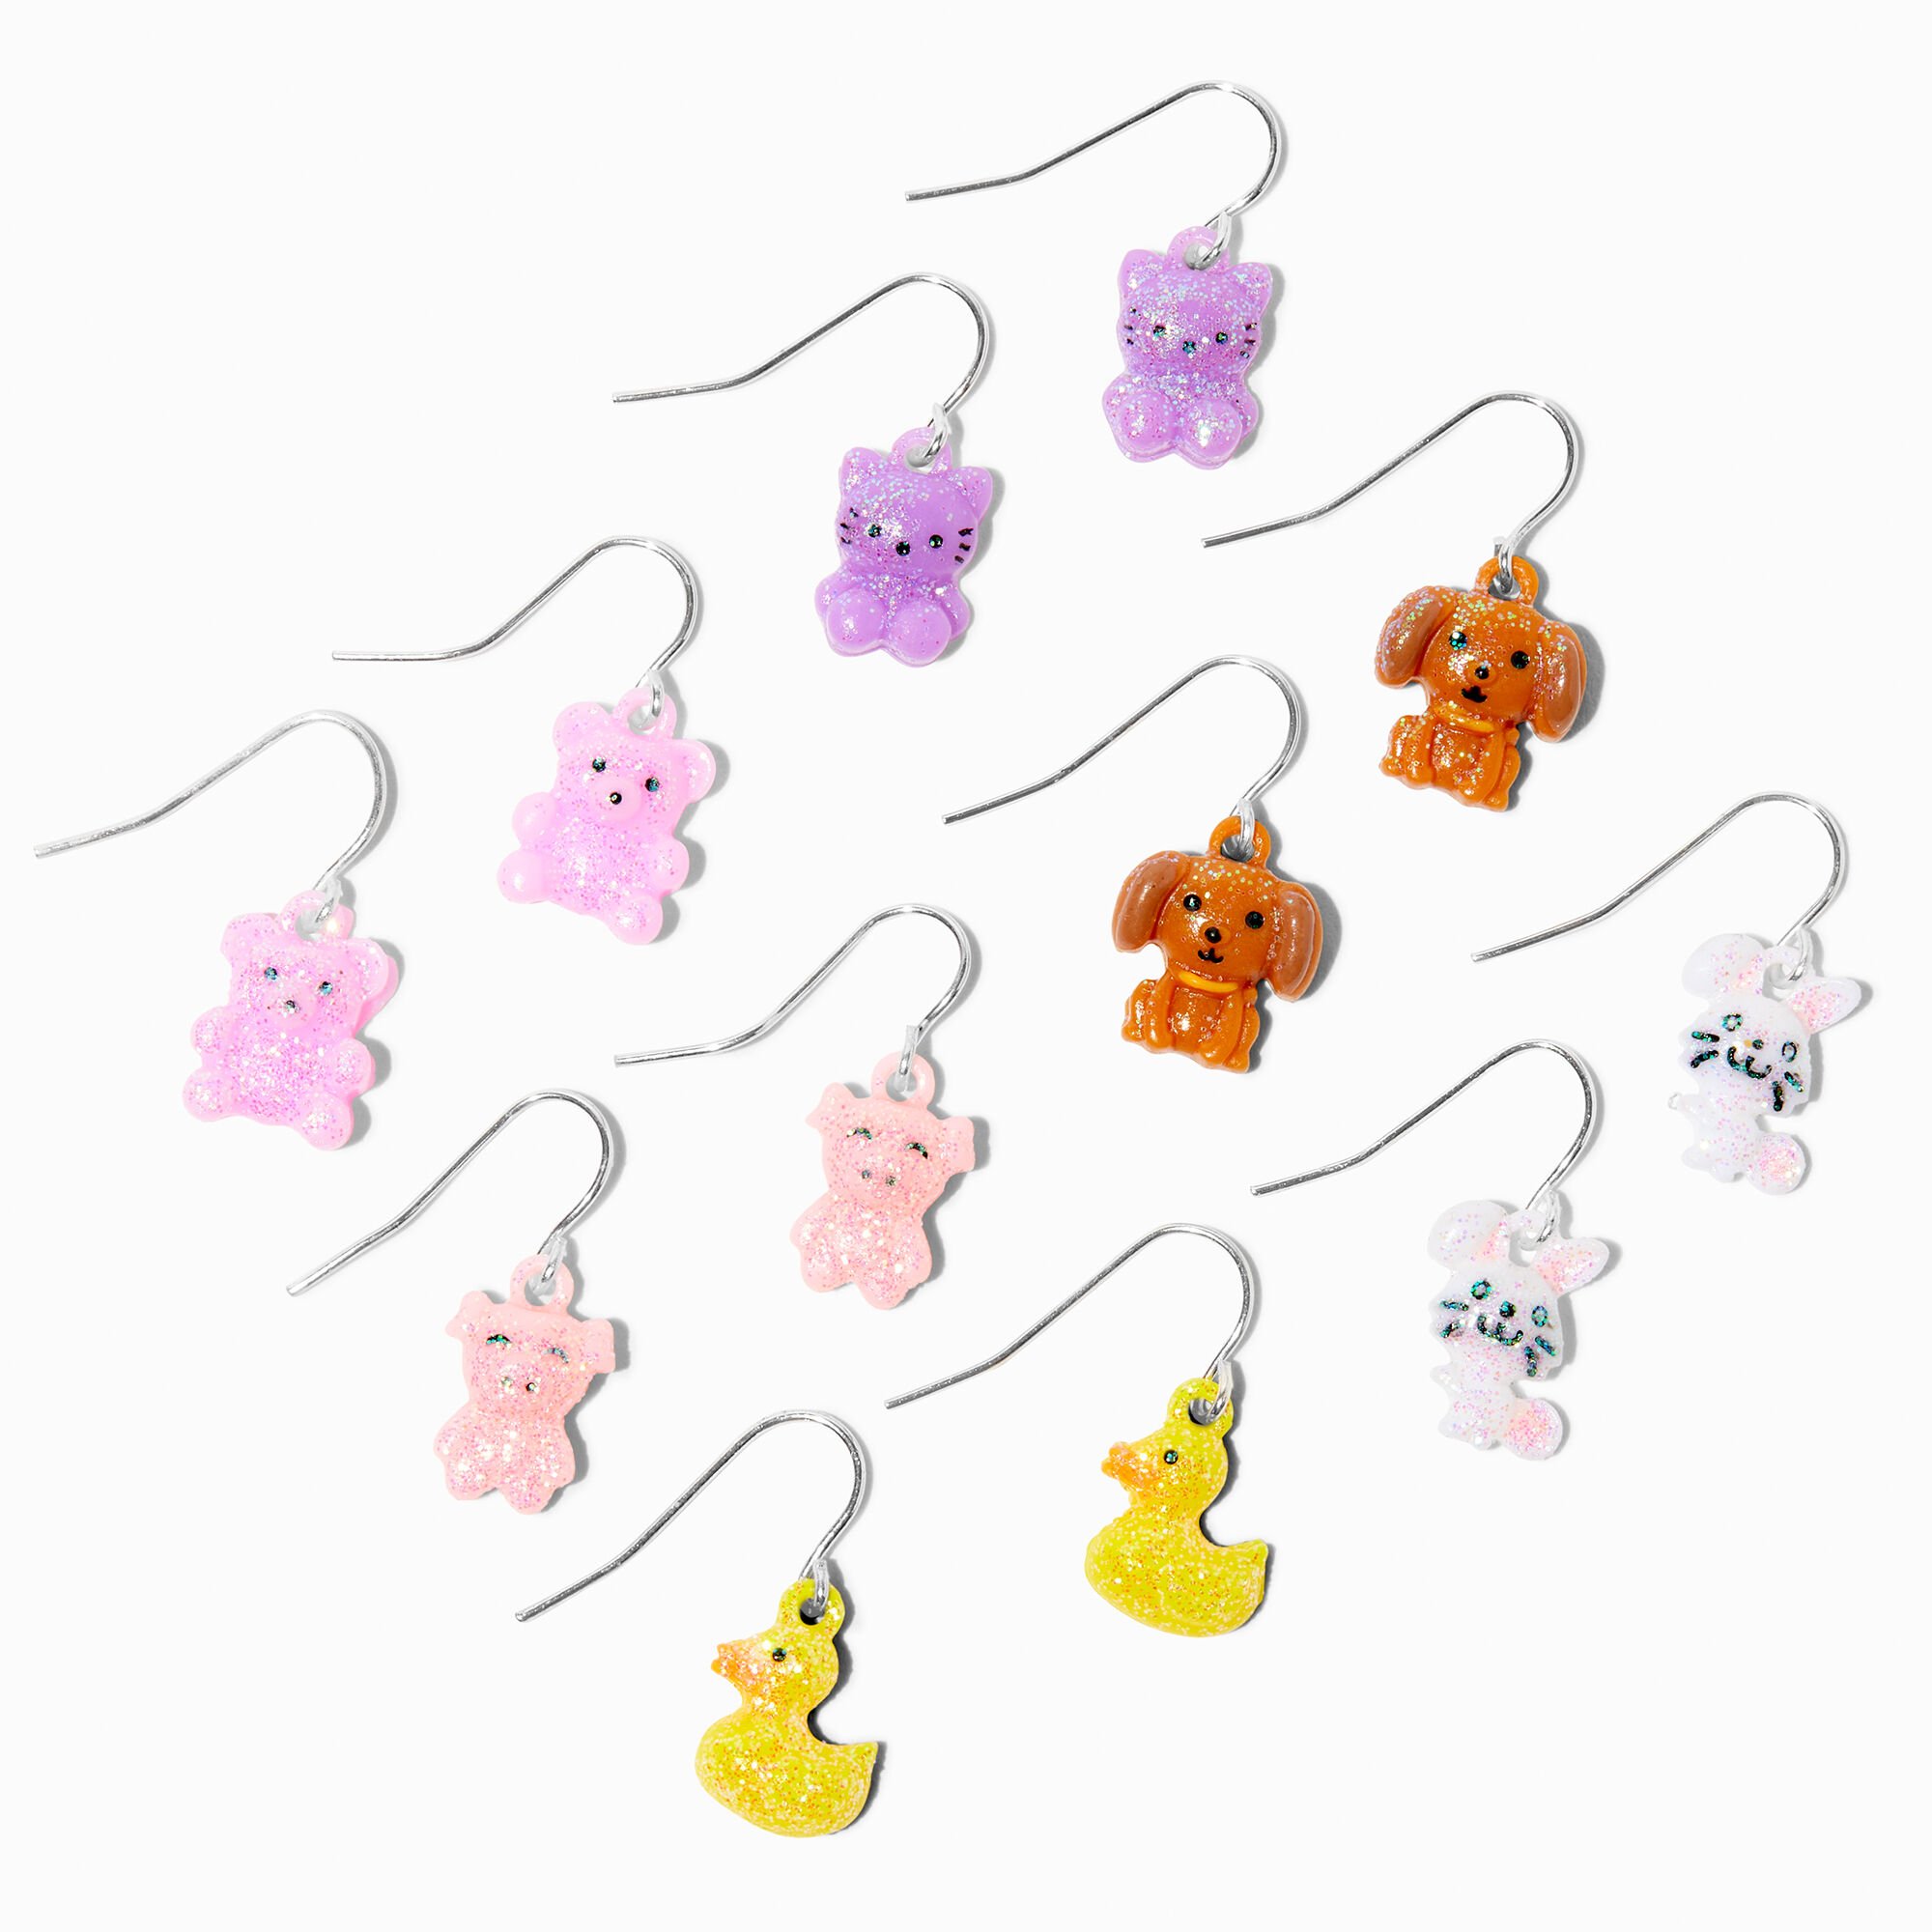 View Claires Farm Animals 1 Drop Earrings 6 Pack Silver information